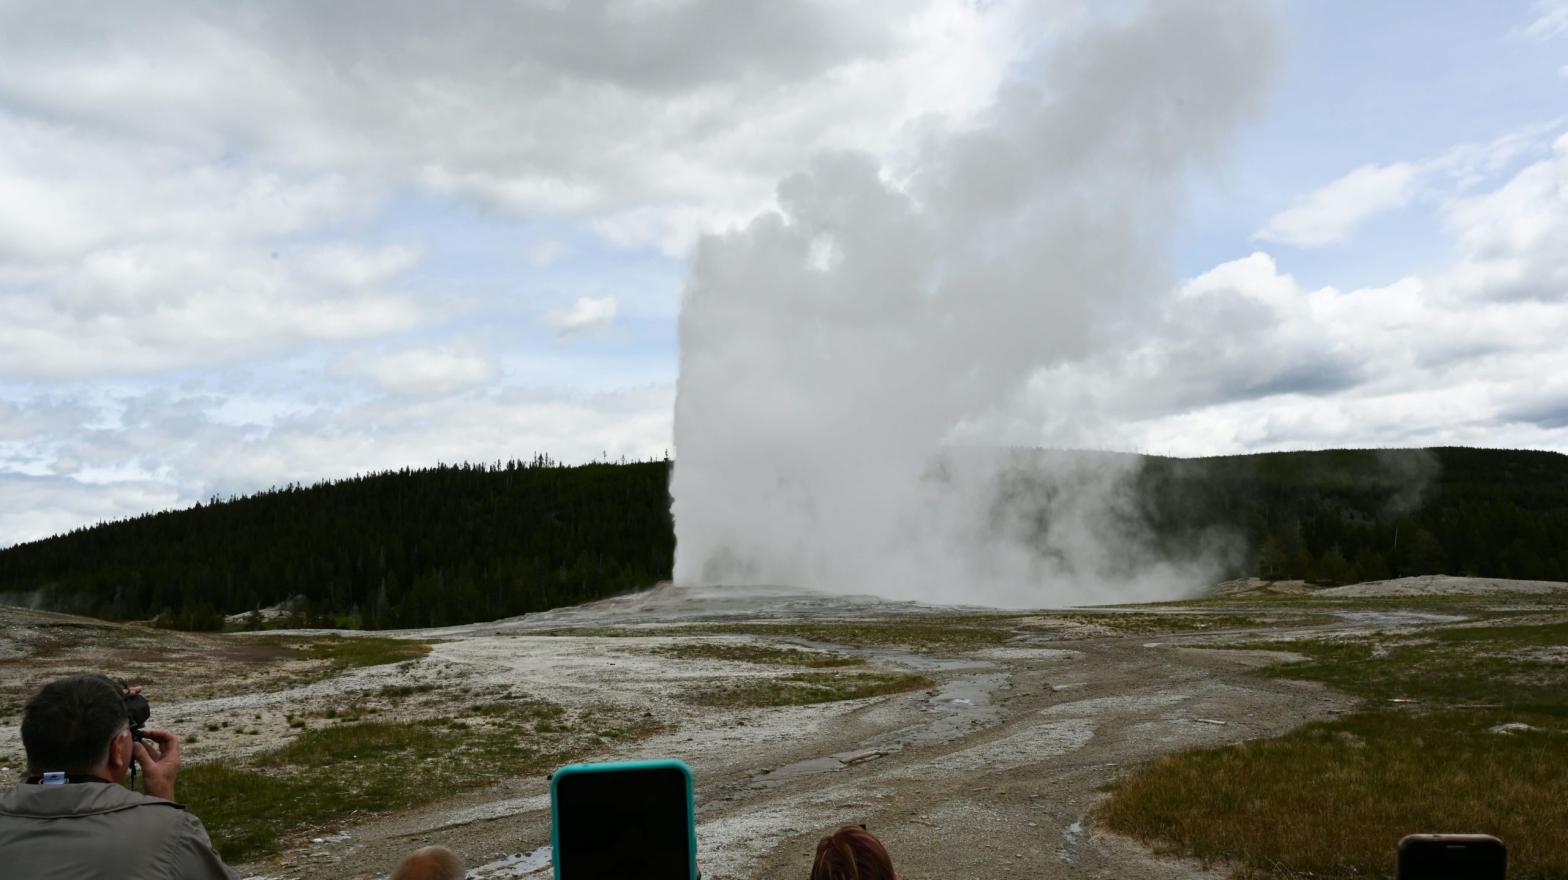 Who wants to boil a turkey in Old Faithful next? (Photo: Daniel Slim, Getty Images)